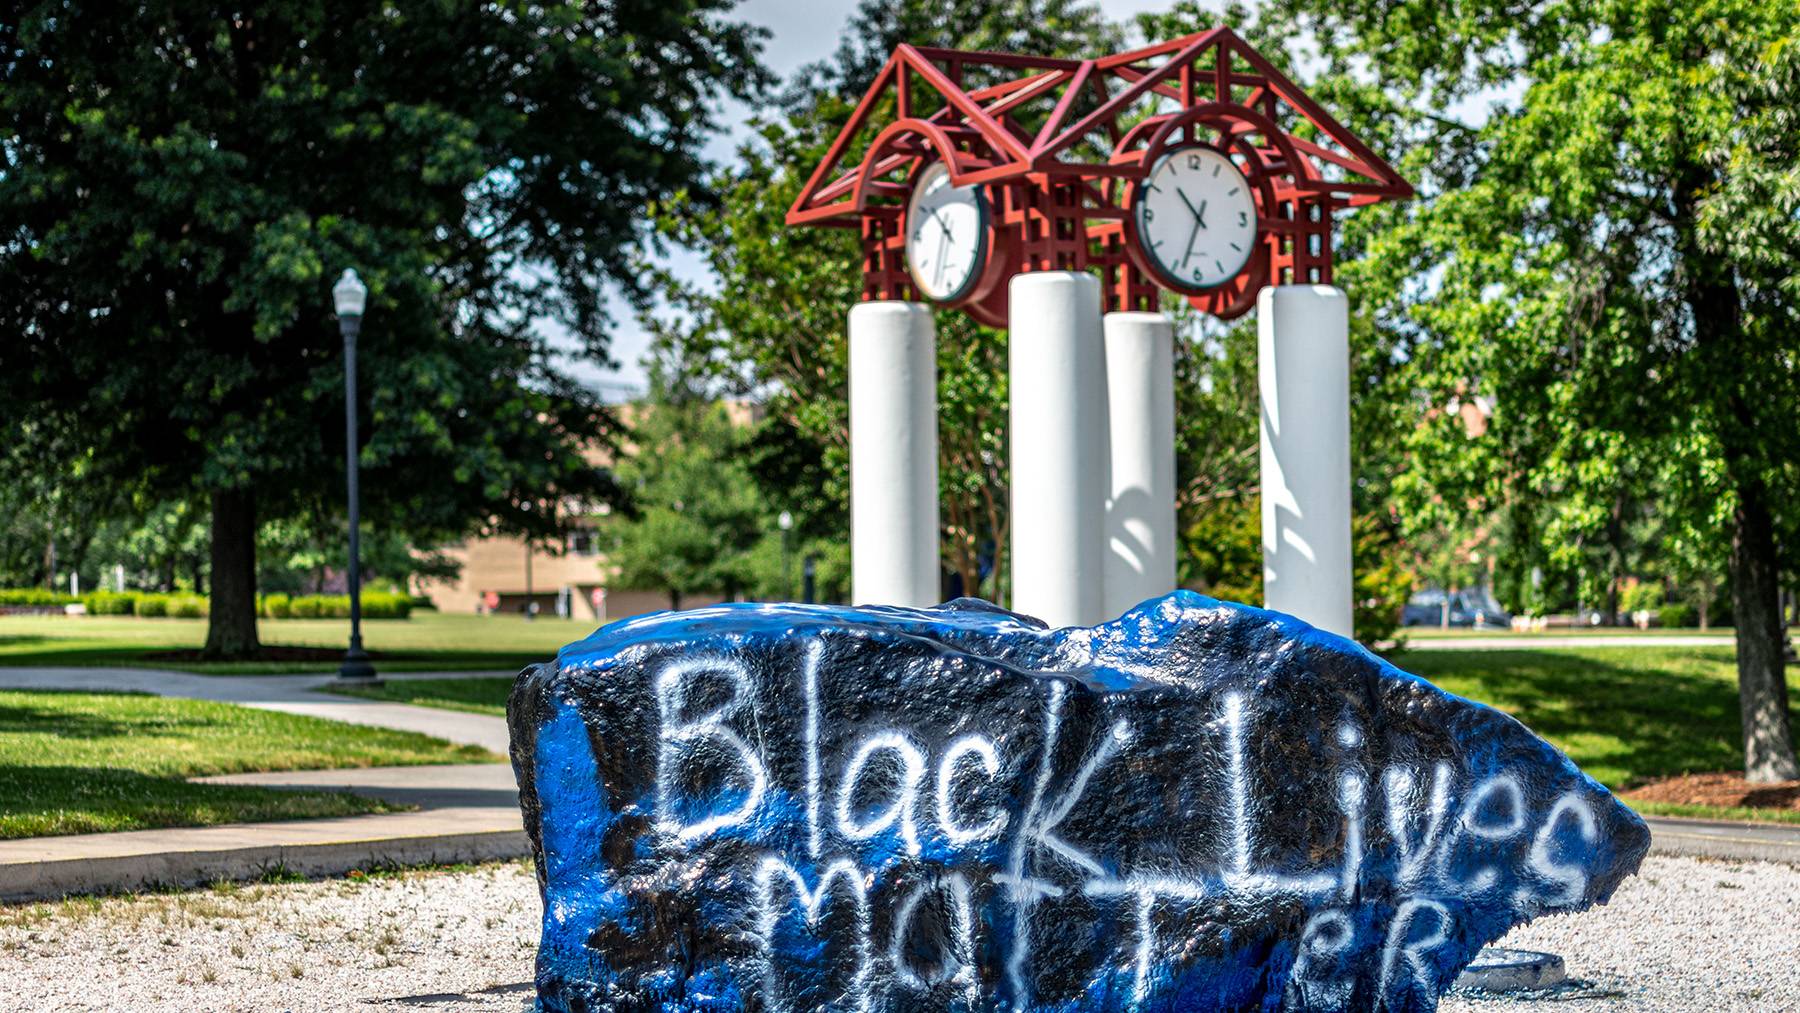 The phrase Black Lives Matter is painted on The Rawk on UNCG’s campus.